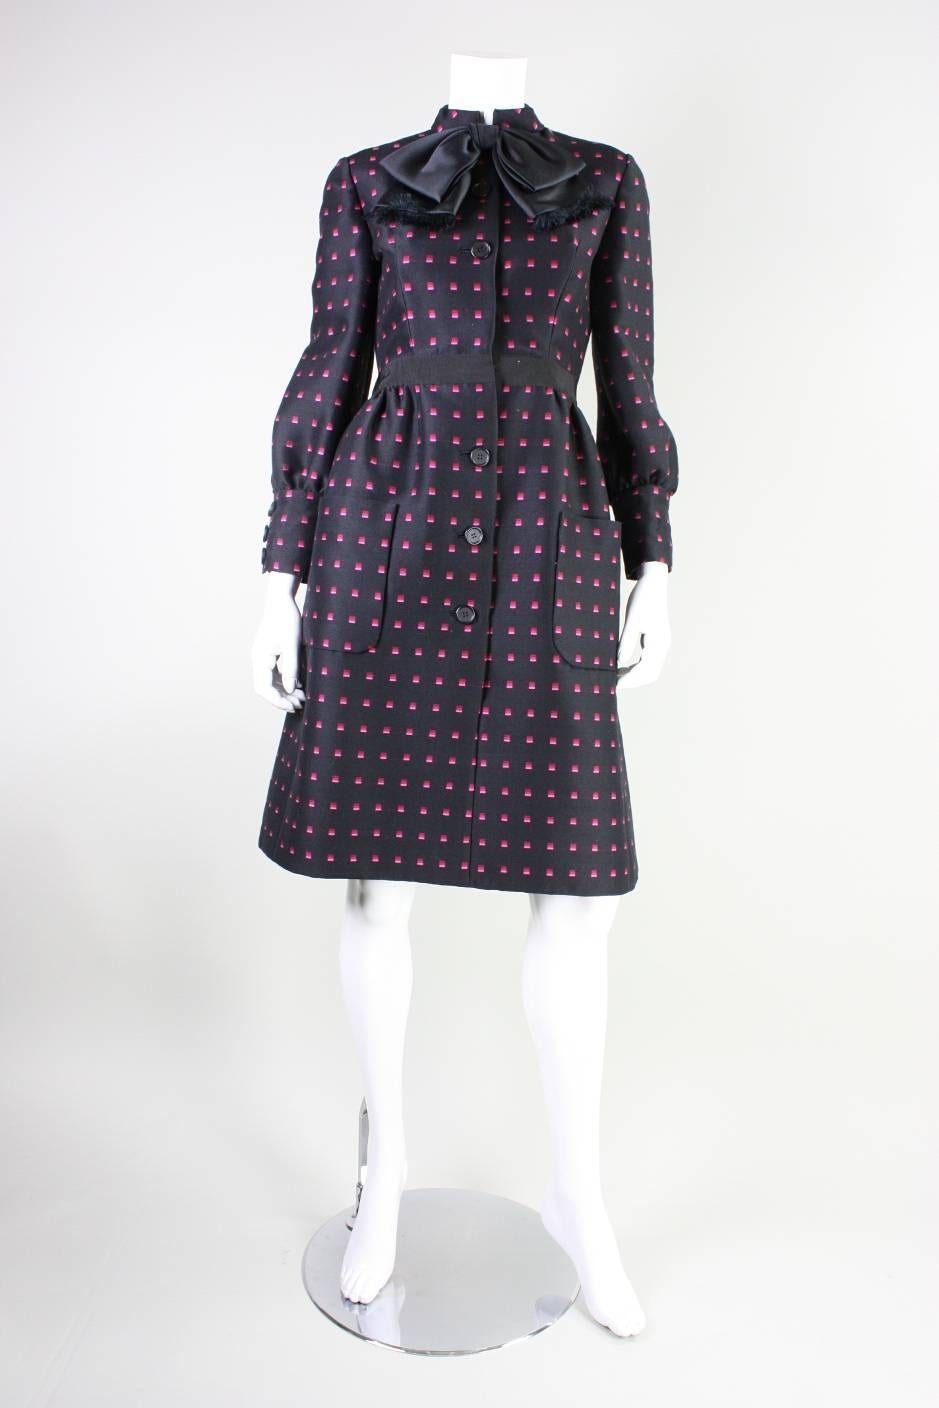 Vintage cocktail or day dress from Chester Weinberg dates to the 1960's and is made of a black wool blend fabric that has a geometric pattern in three shades of pink.  High neckline has a large center front bow.  Patch pockets at front hips.  Long